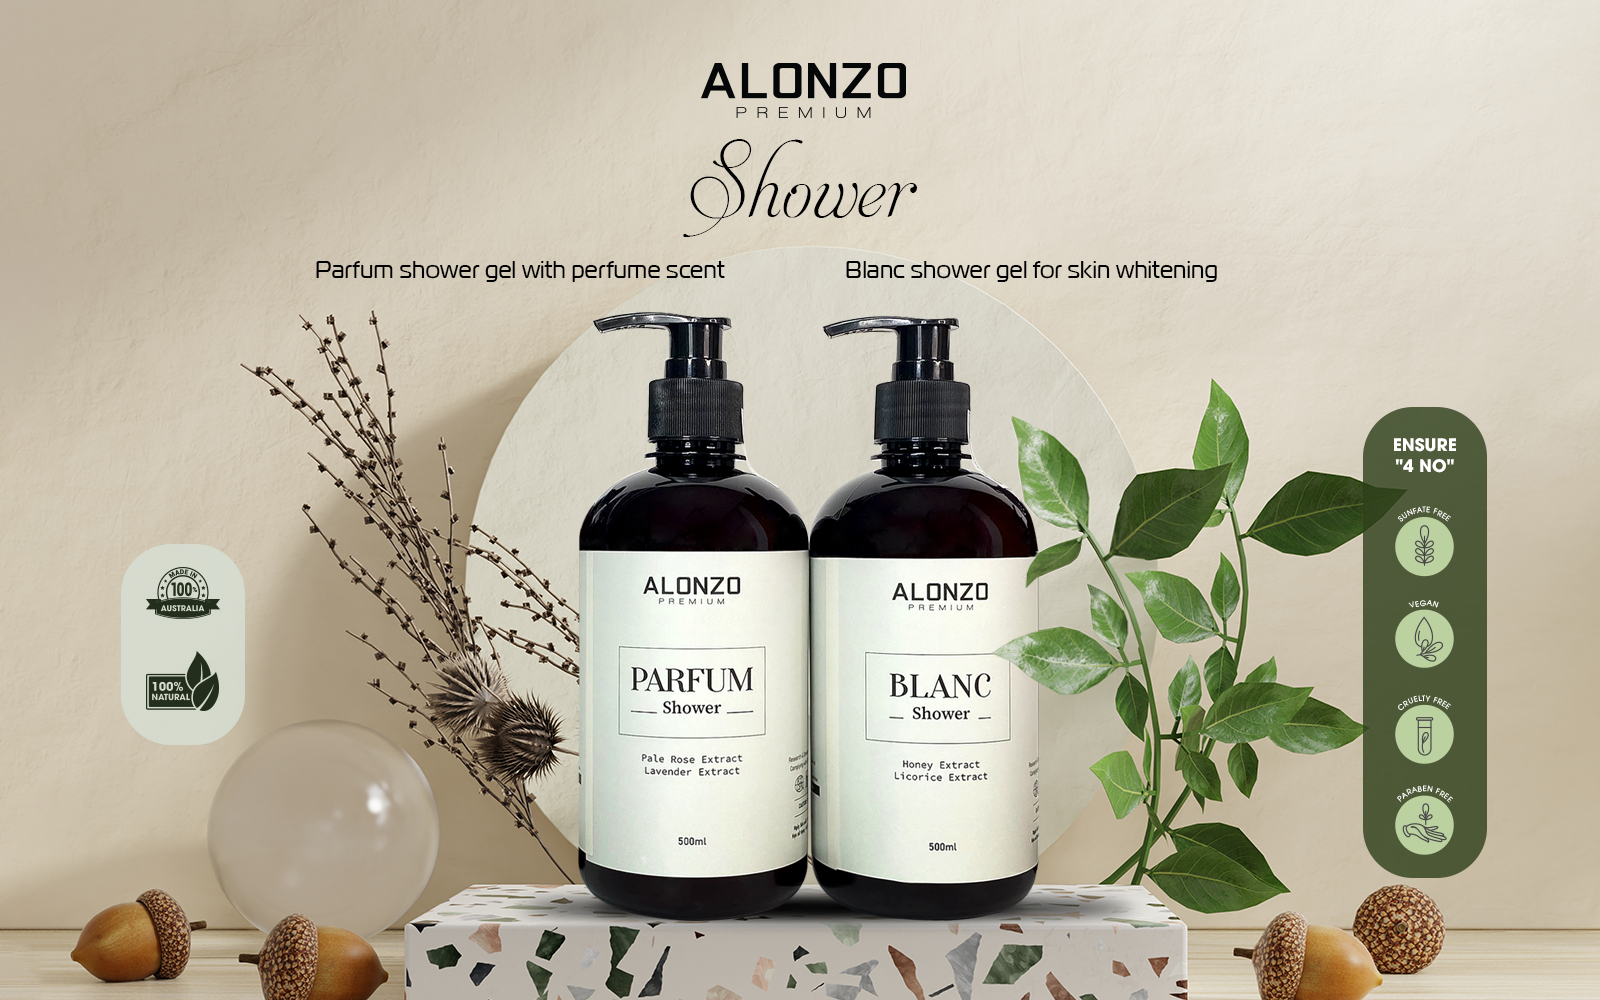 The set of Alonzo Premium shower gel products